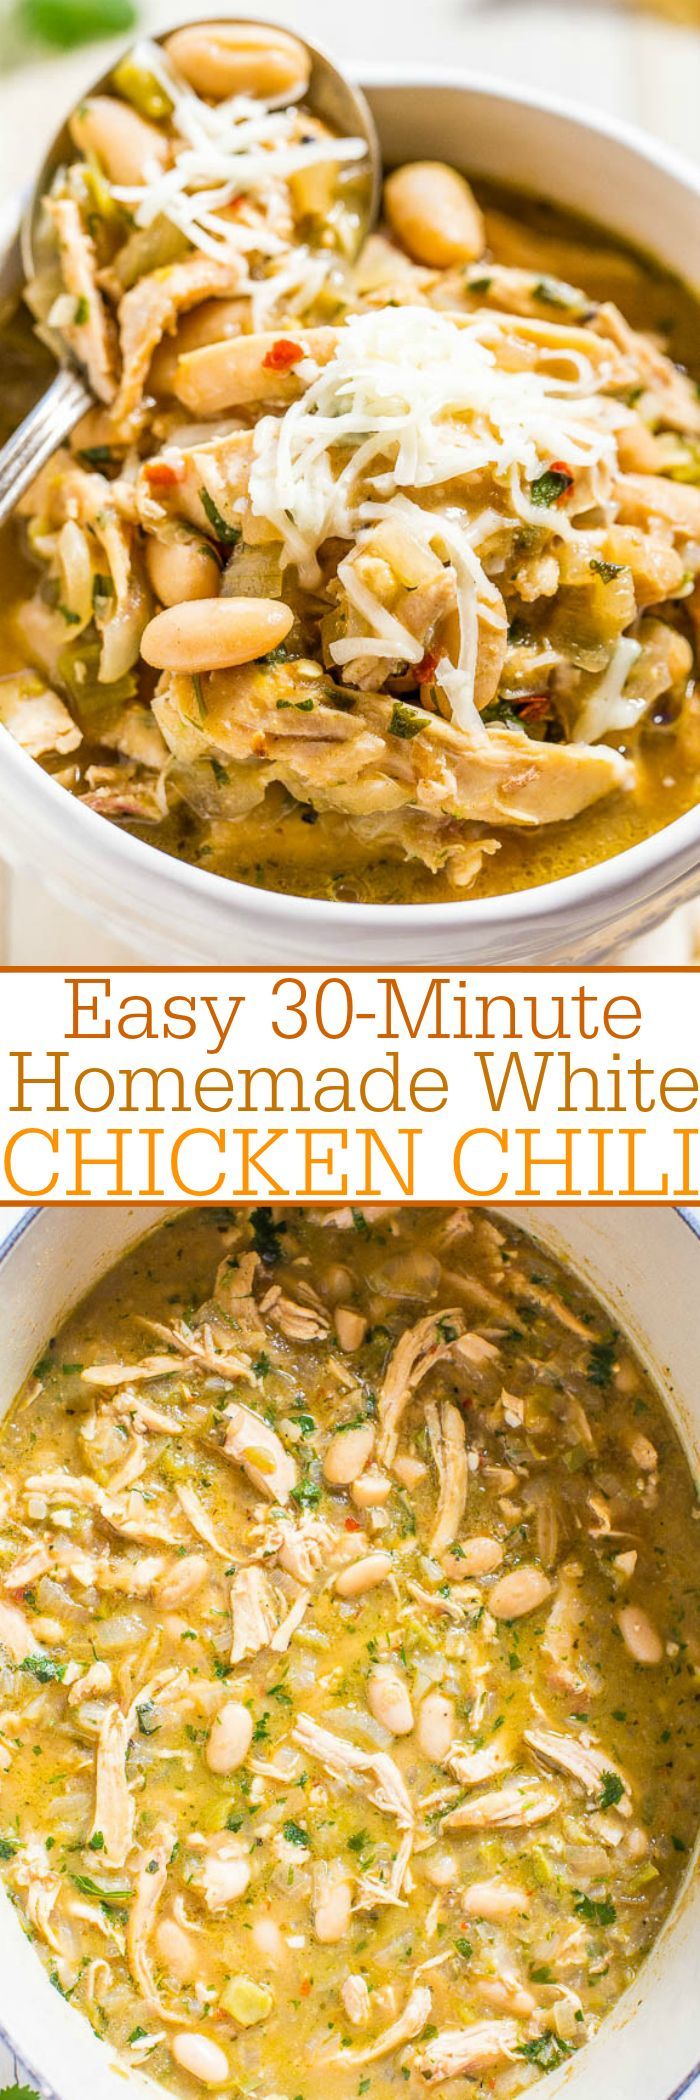 Easy 30-Minute Homemade White Chicken Chili – Hearty, healthy, loaded with tender chicken, and packed